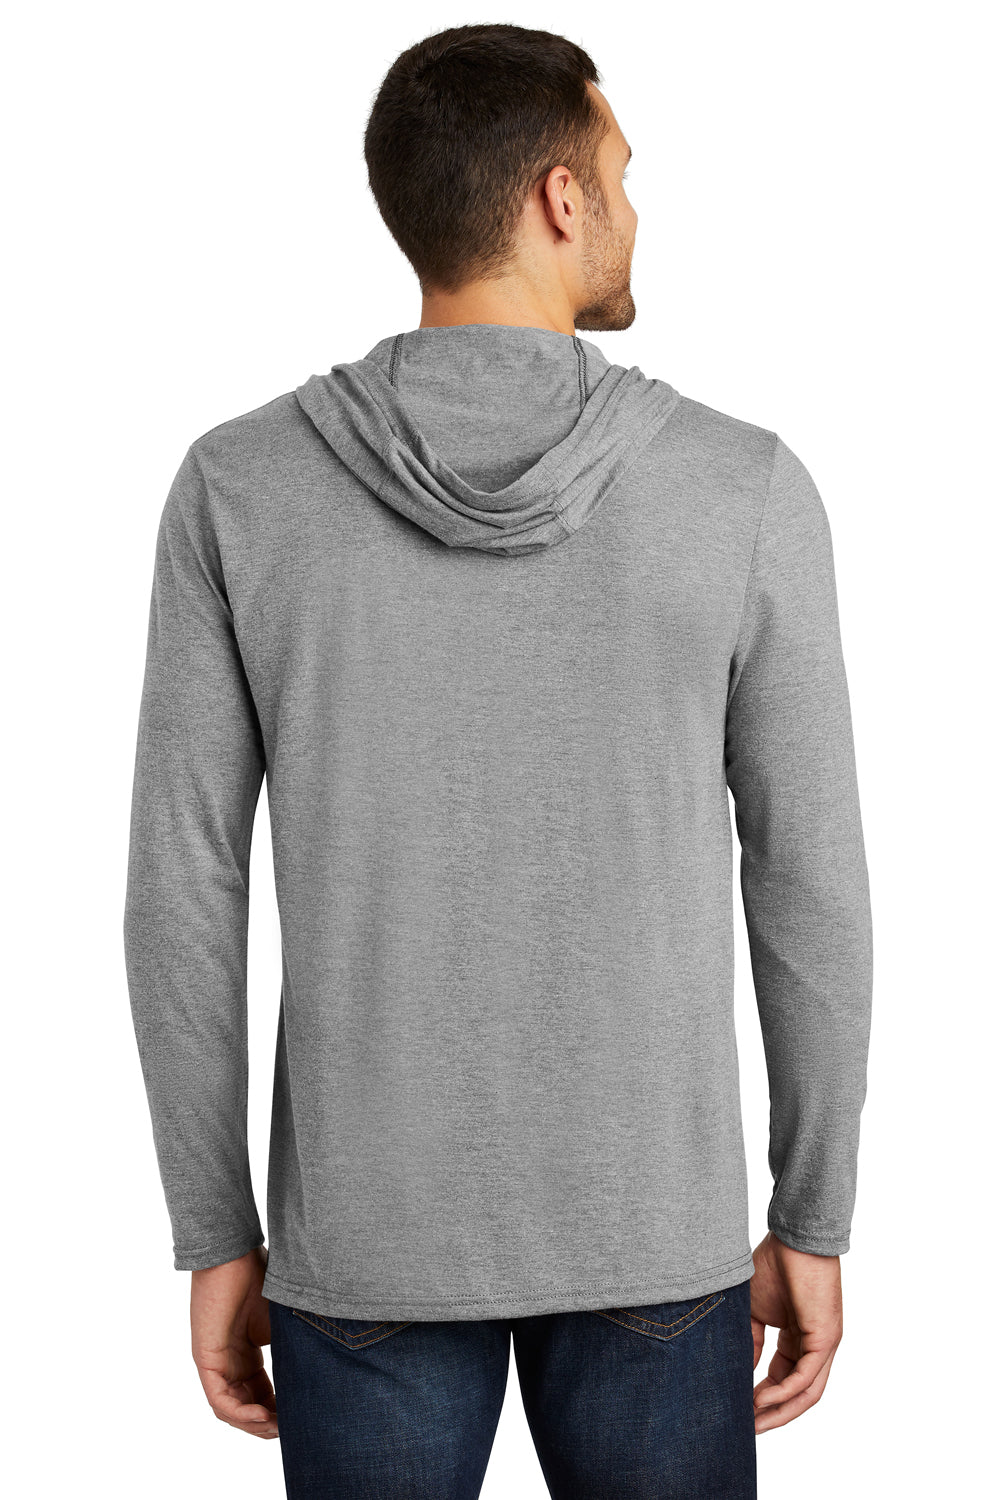 District DM139 Mens Perfect Tri Long Sleeve Hooded T-Shirt Hoodie Grey Frost Back